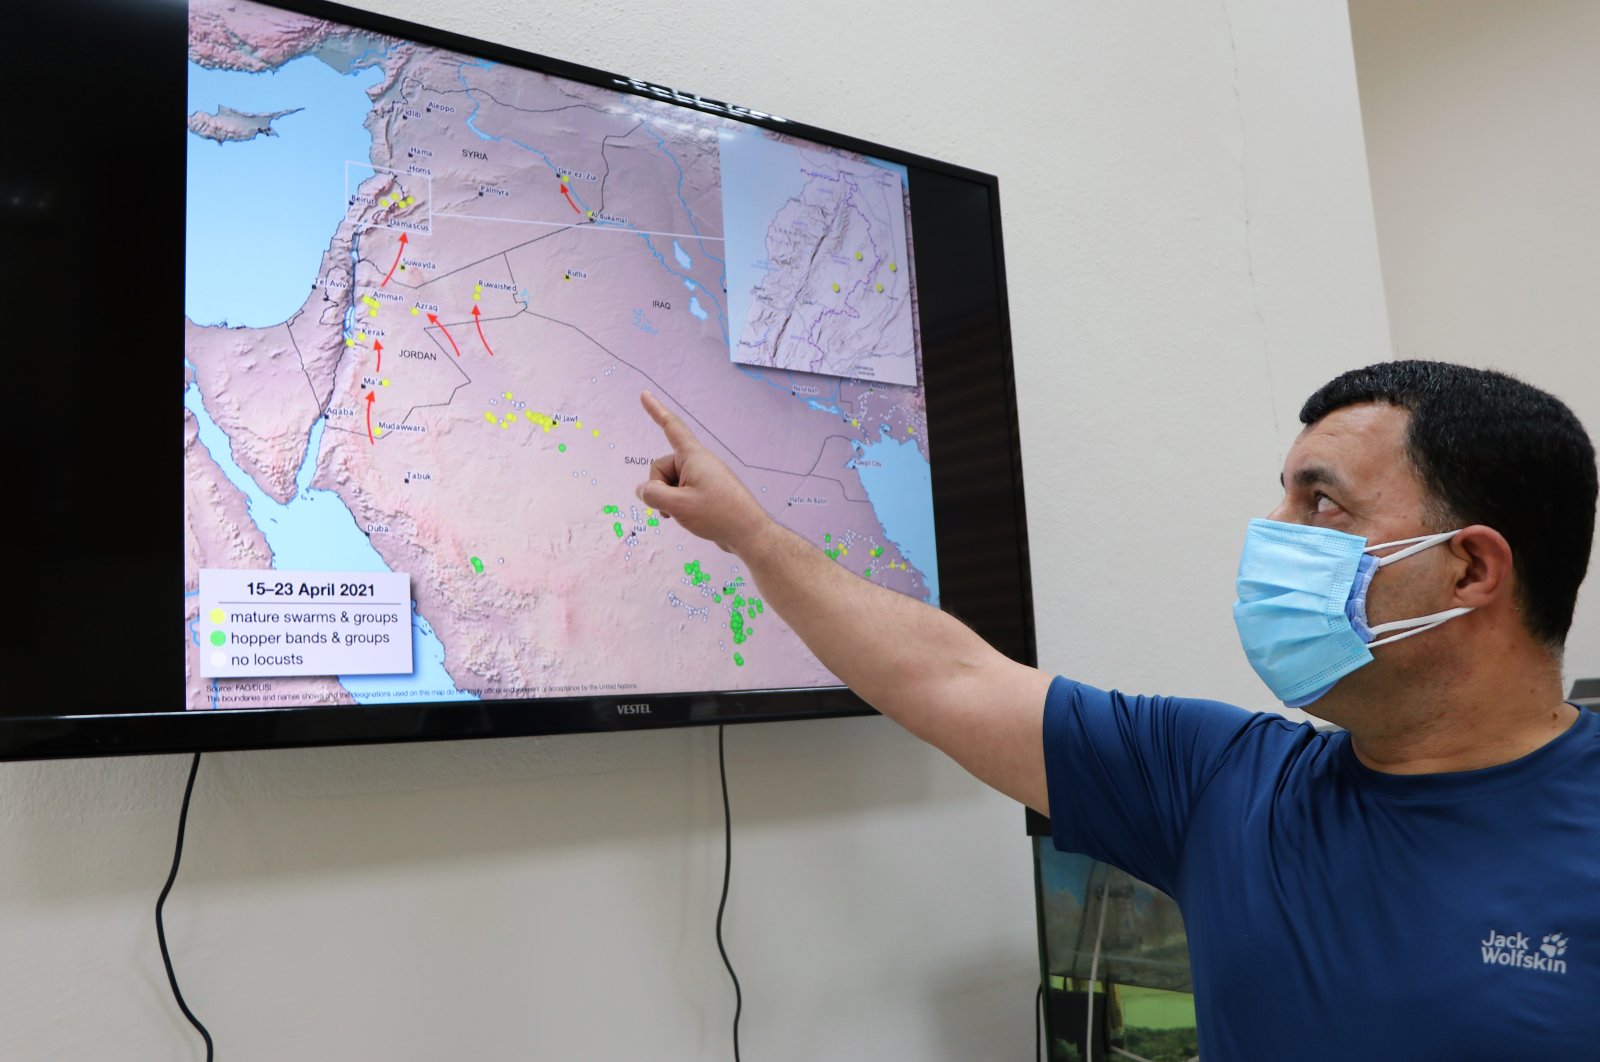 Zoology professor Ali Satar points out the route of desert locusts, in Diyarbakır, Turkey, April 30, 2021. (DHA Photo)